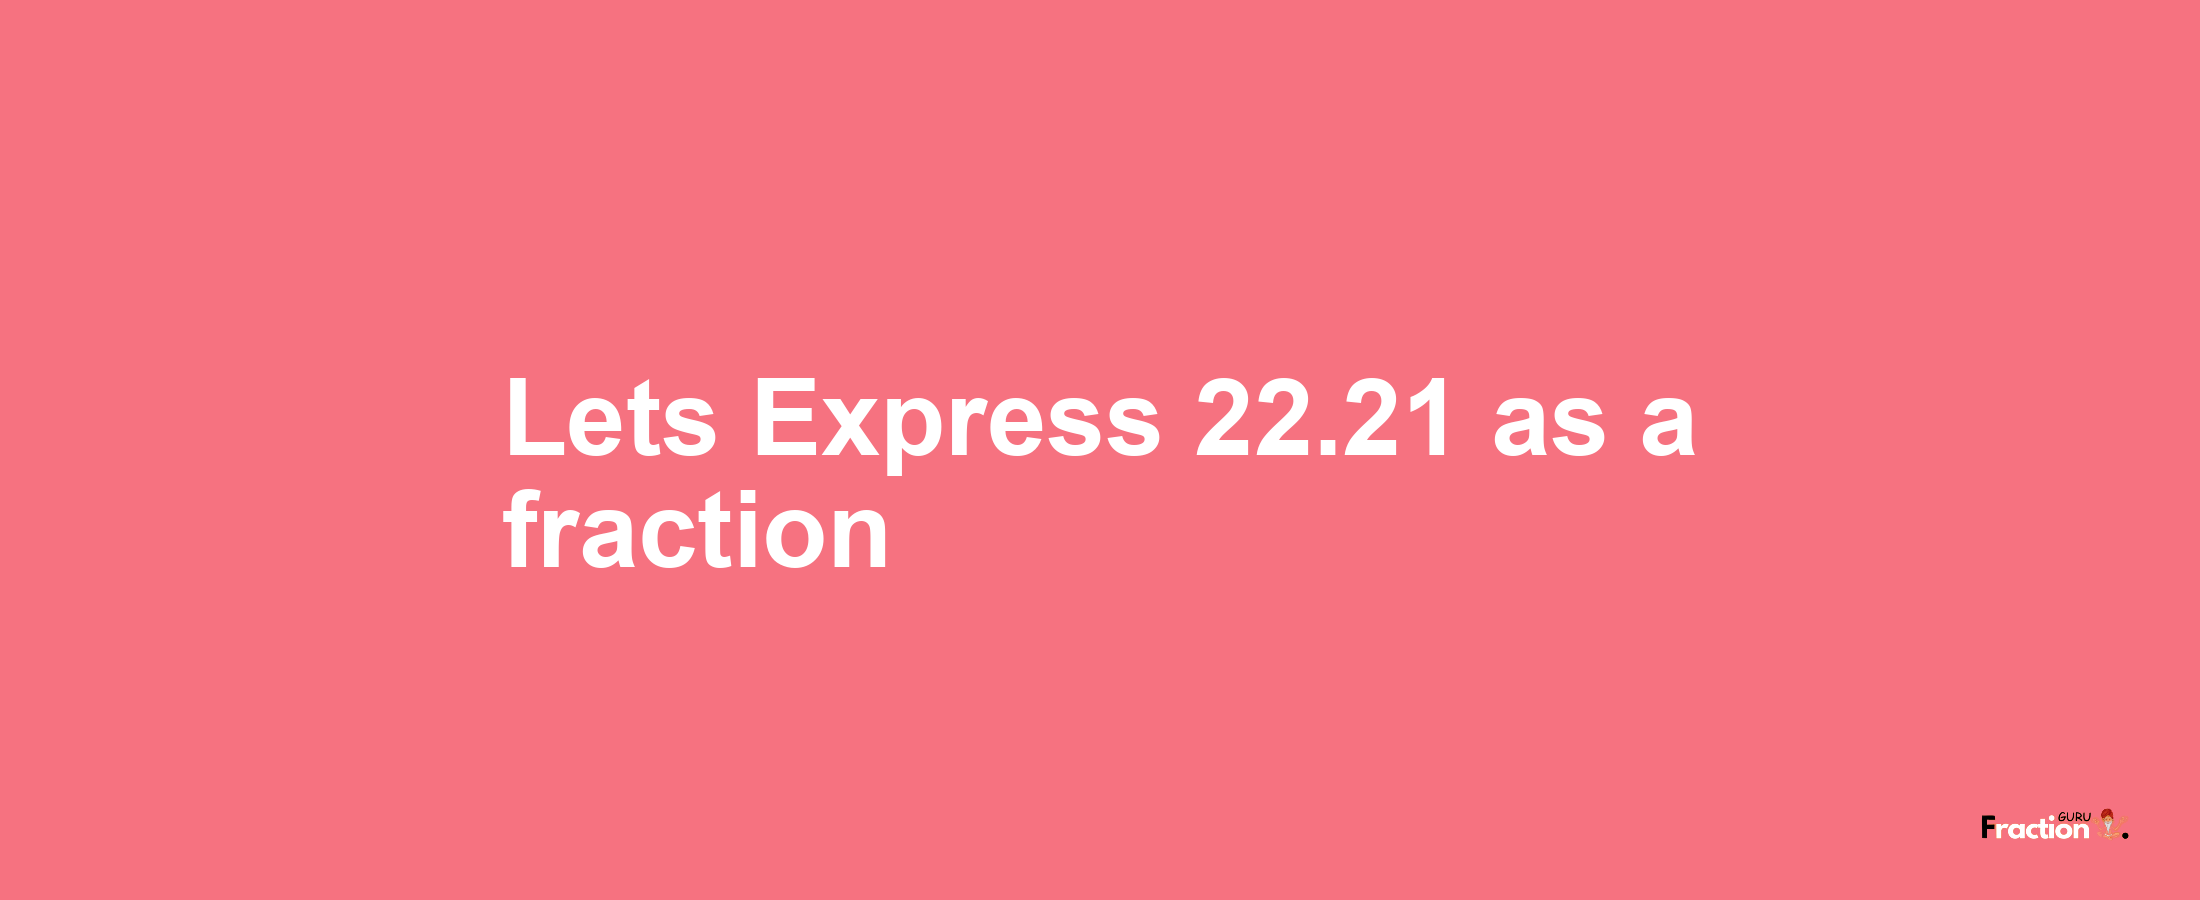 Lets Express 22.21 as afraction